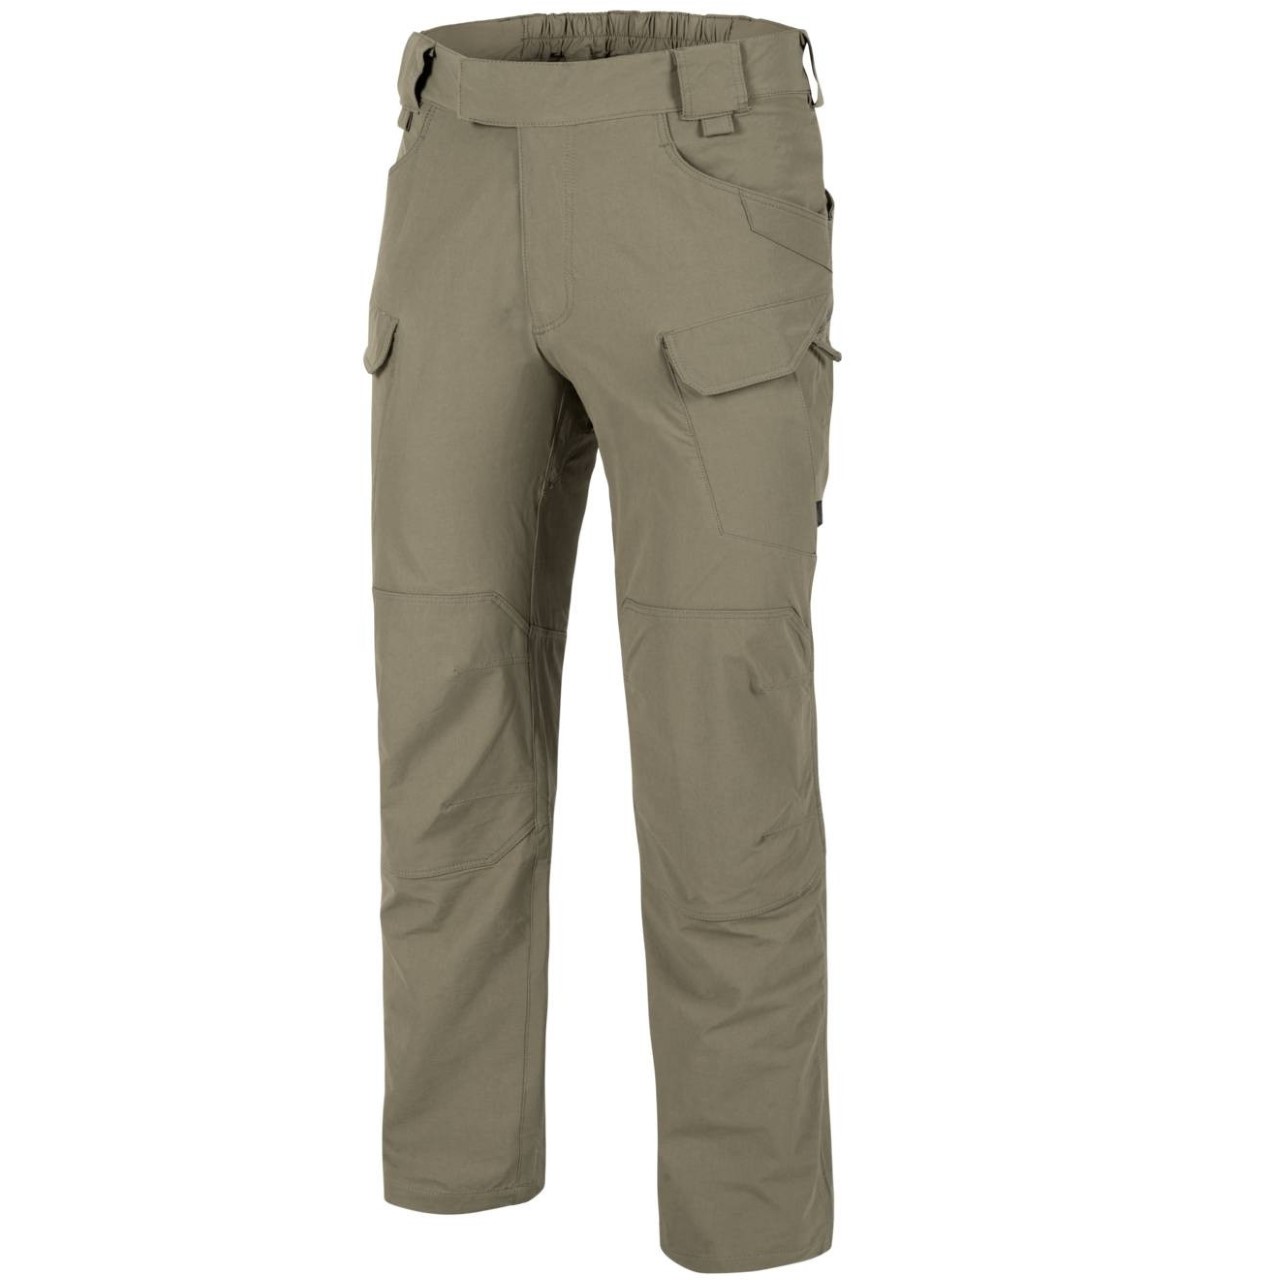 Outdoor Tactical Pant (OTP) Adaptive Green